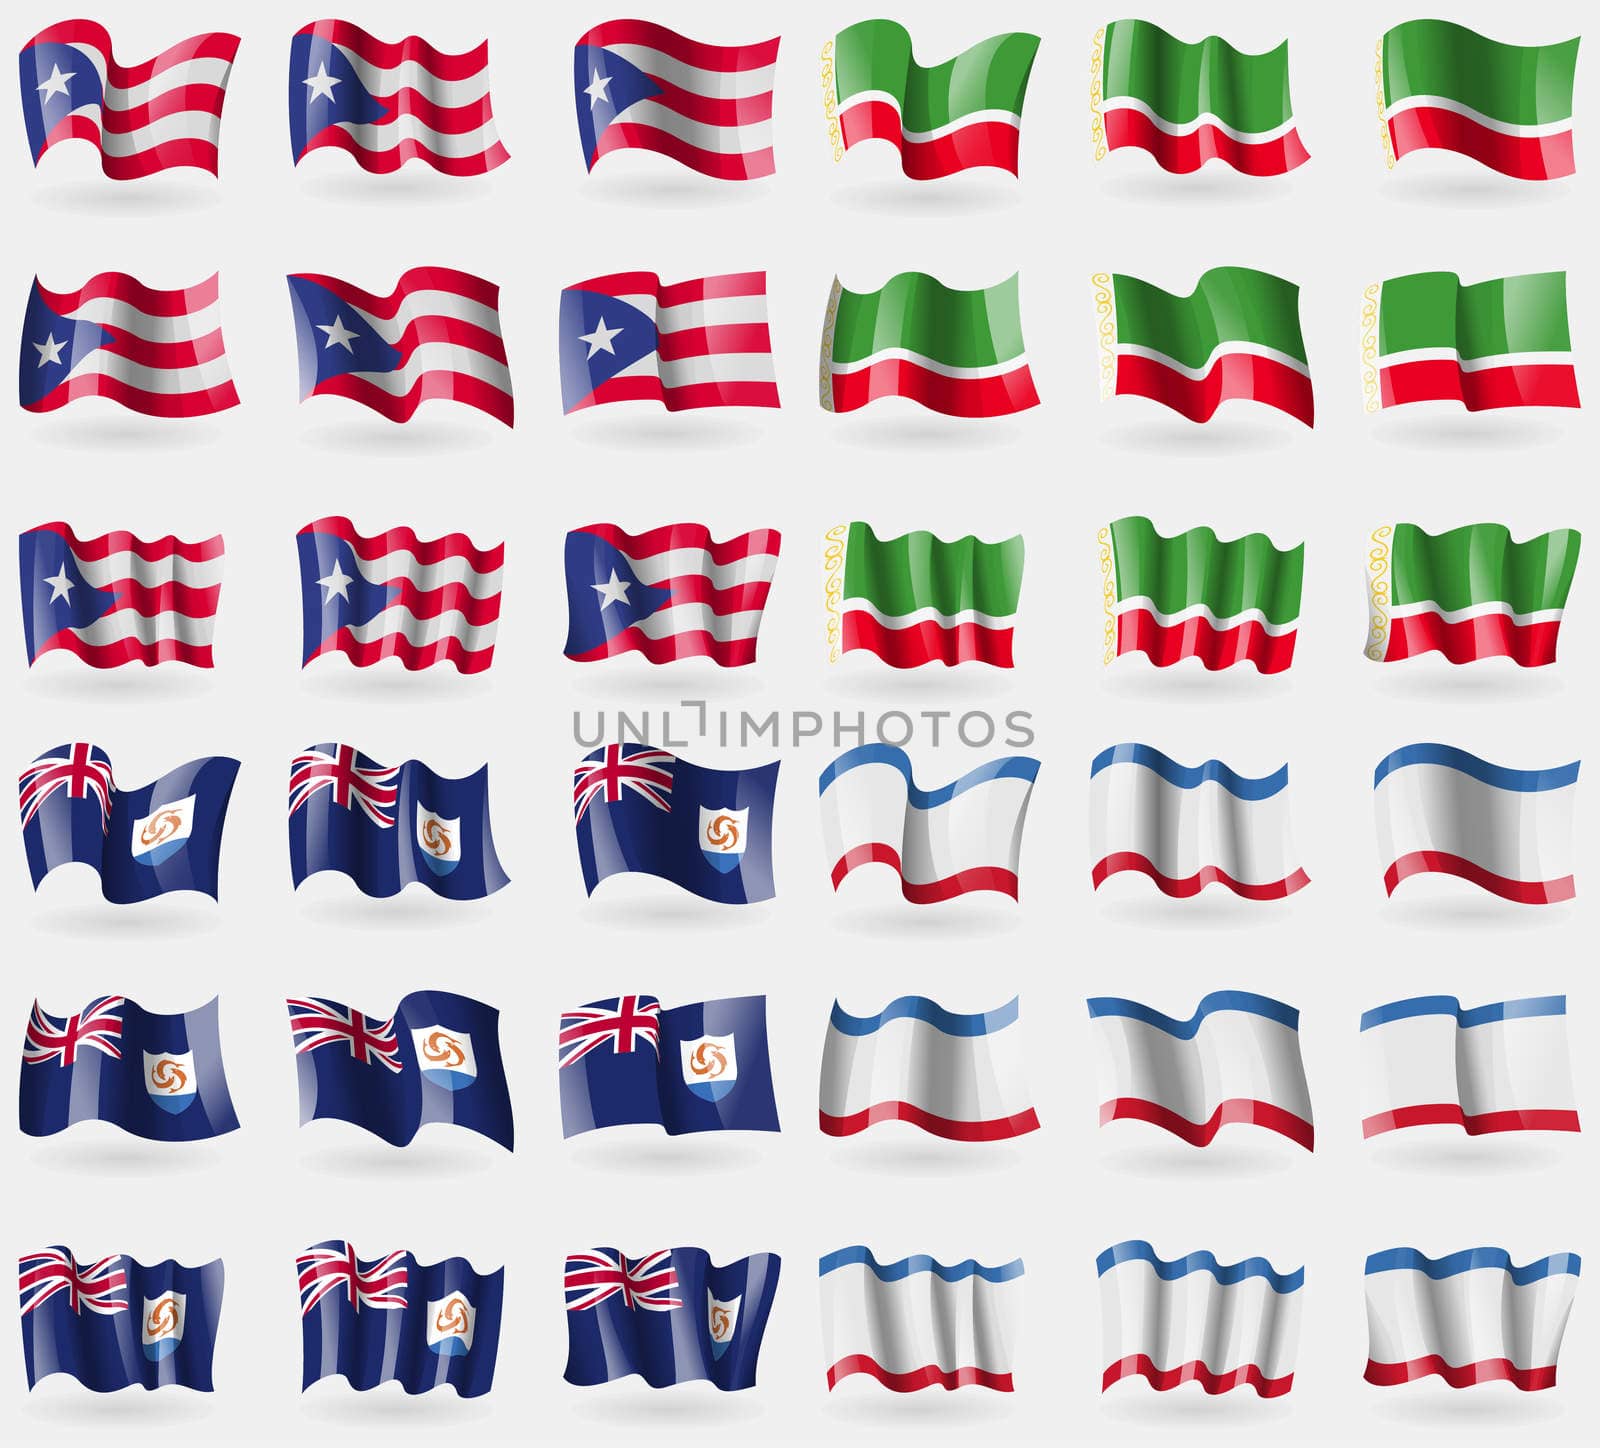 Puerto Rico, Chechen Republic, Anguilla, Crimea. Set of 36 flags of the countries of the world. illustration